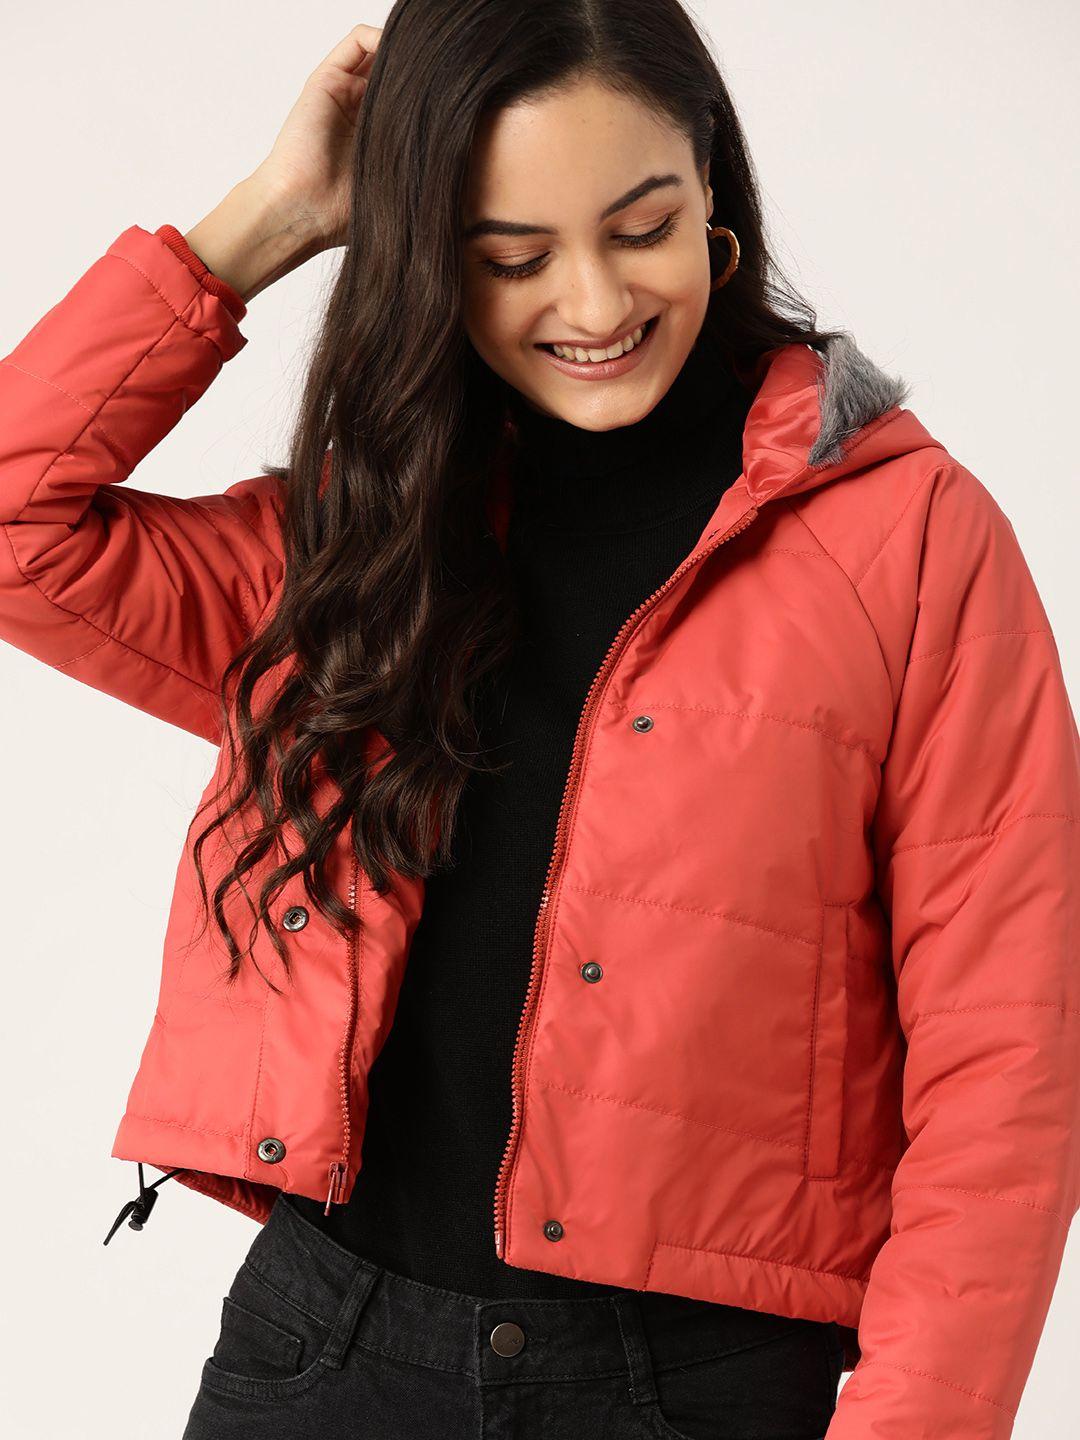 dressberry women rust red solid hooded parka jacket